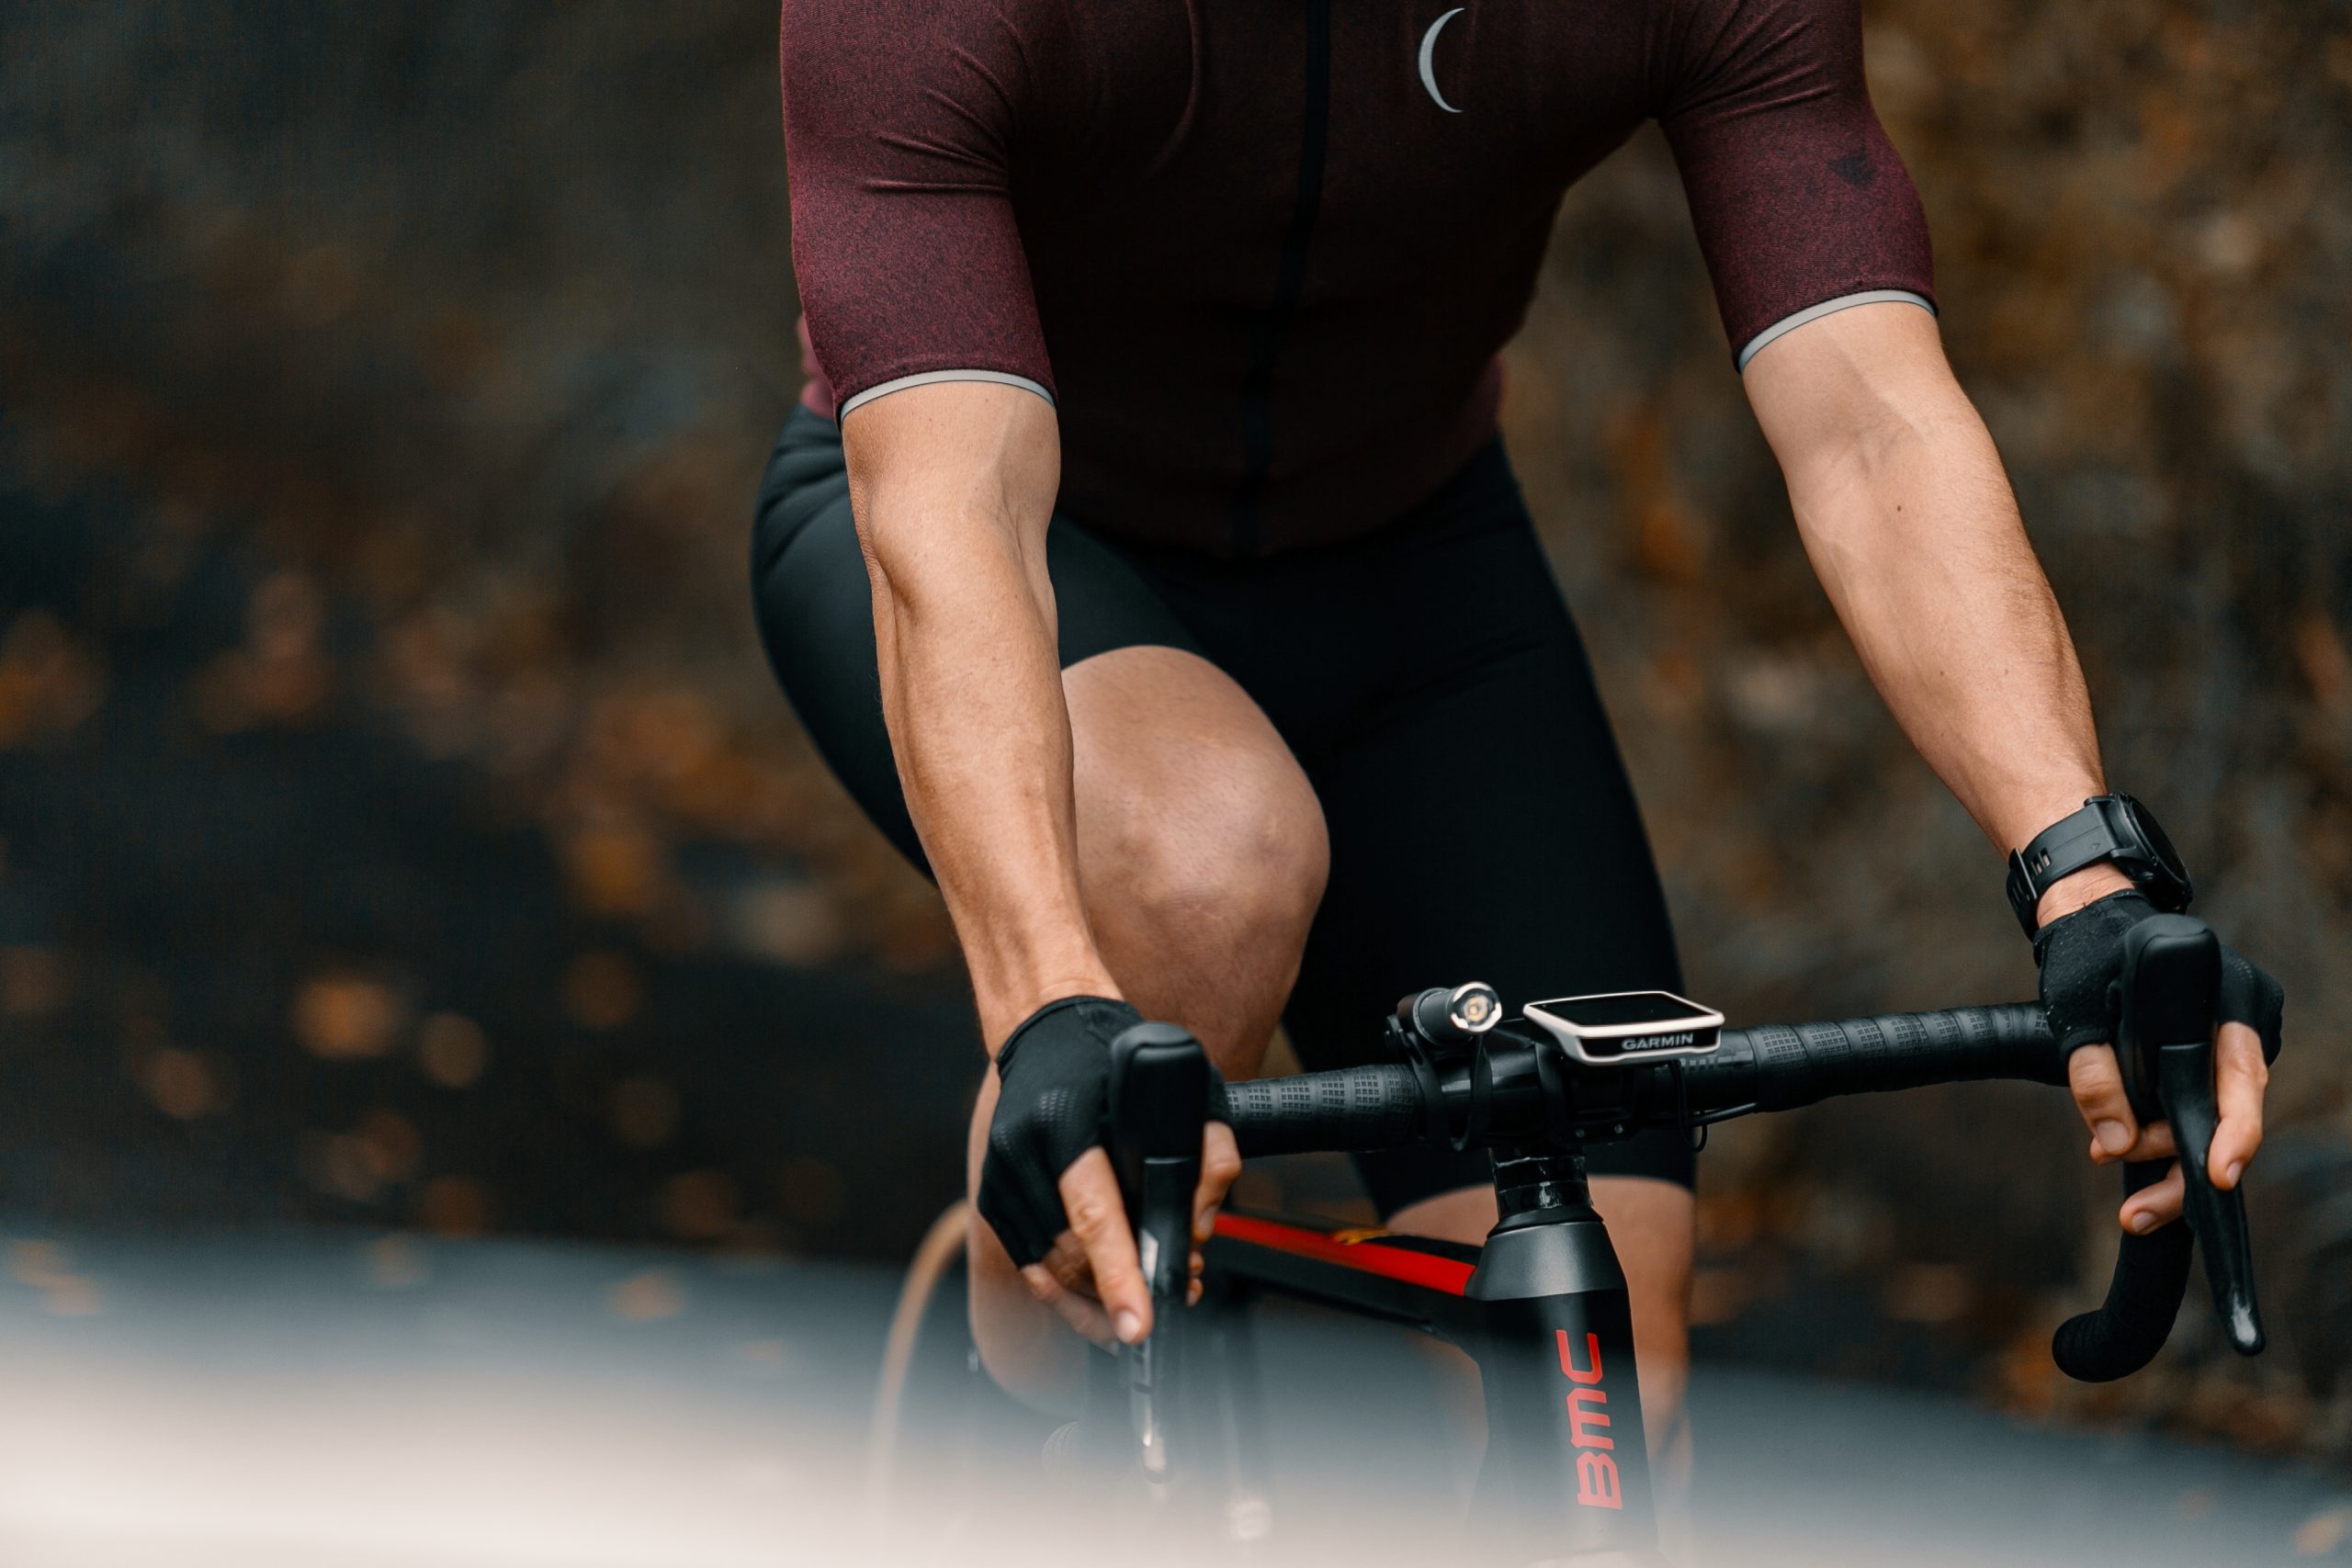 padded cycling tights, padded cycling tights Suppliers and Manufacturers at